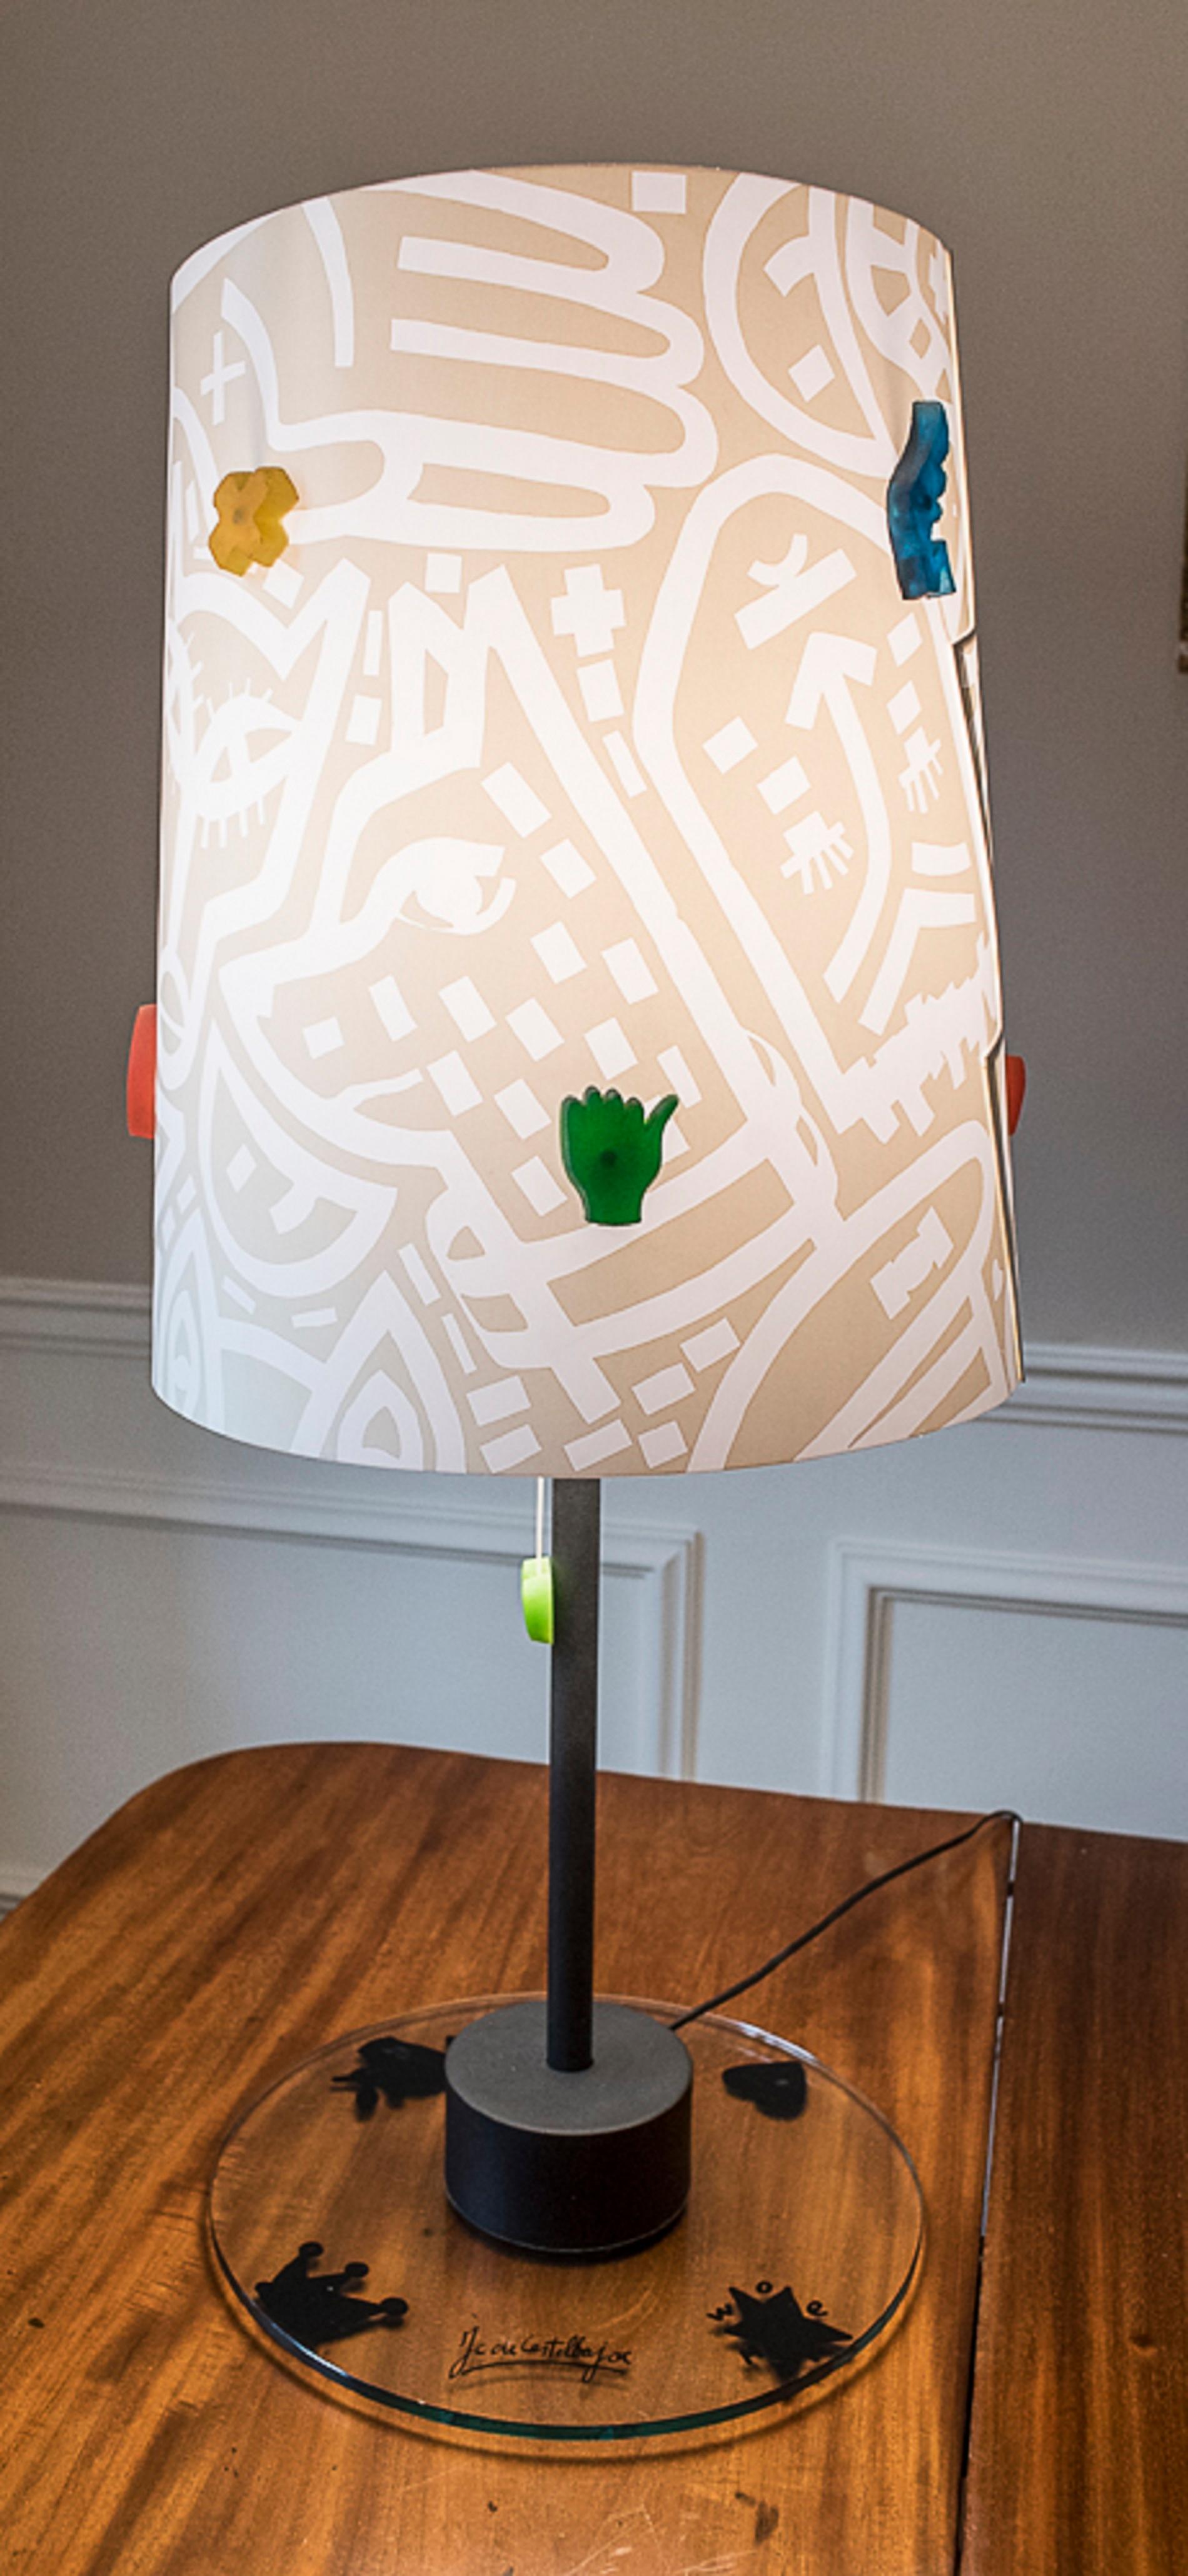 Crystal J.Charles Castelbajac Table Lamp with Diferentescolors and Patterns of Stars